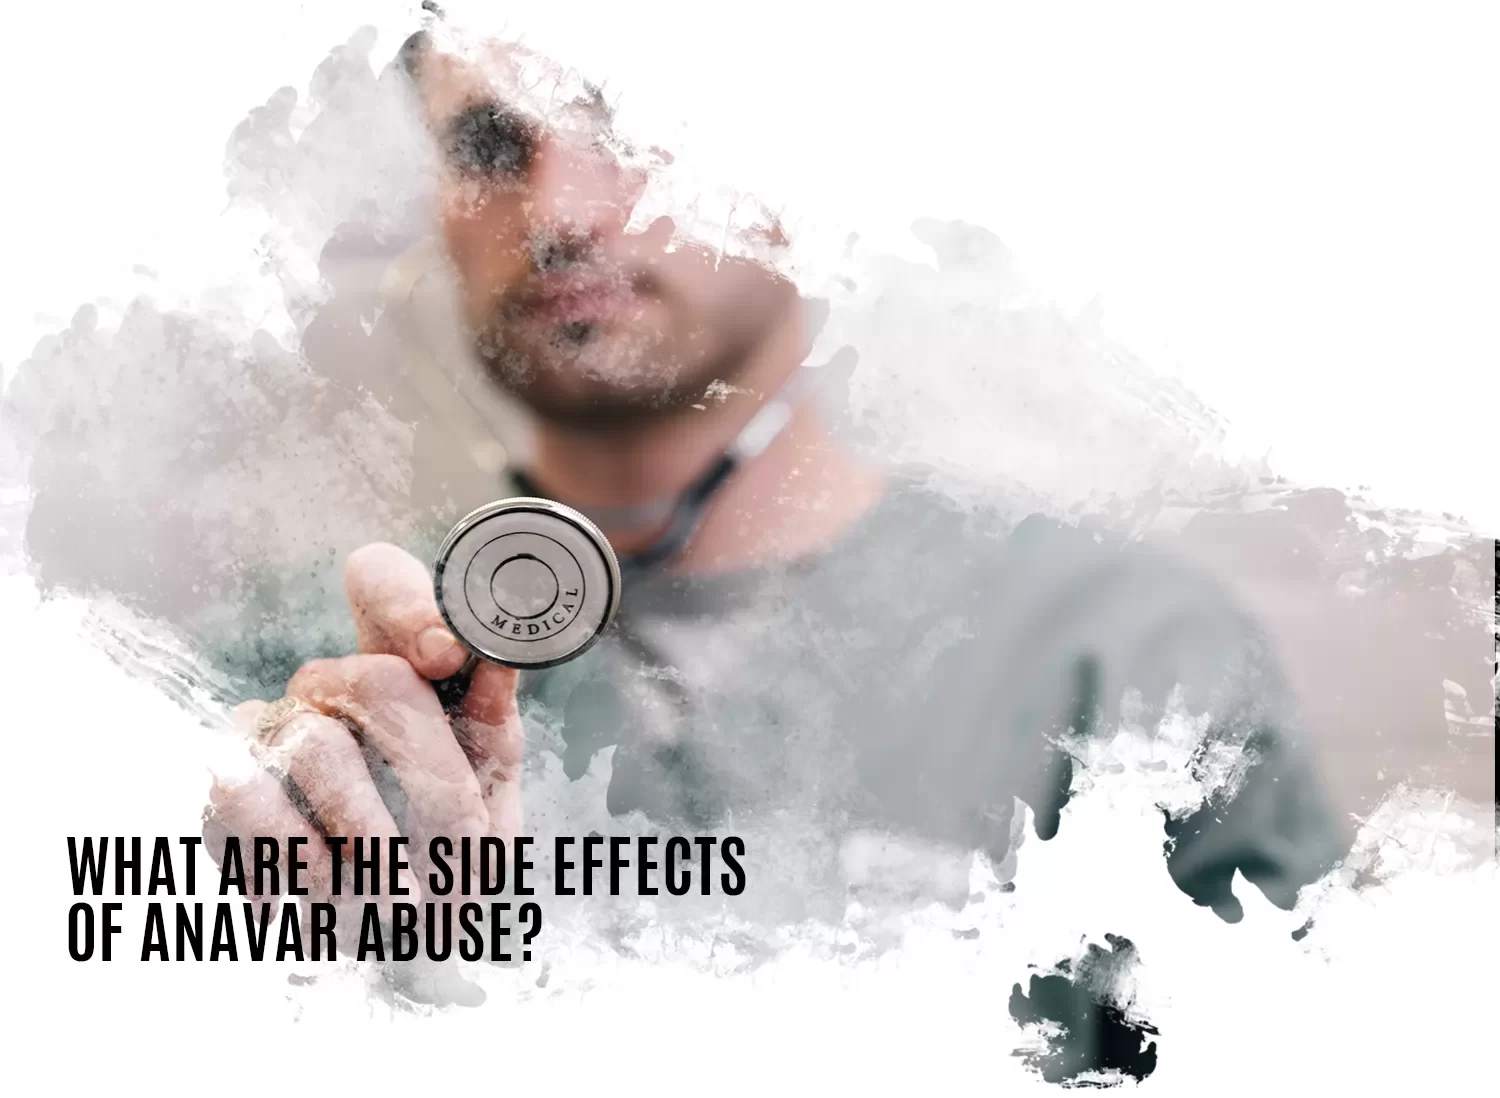 Side effects of Anavar abuse